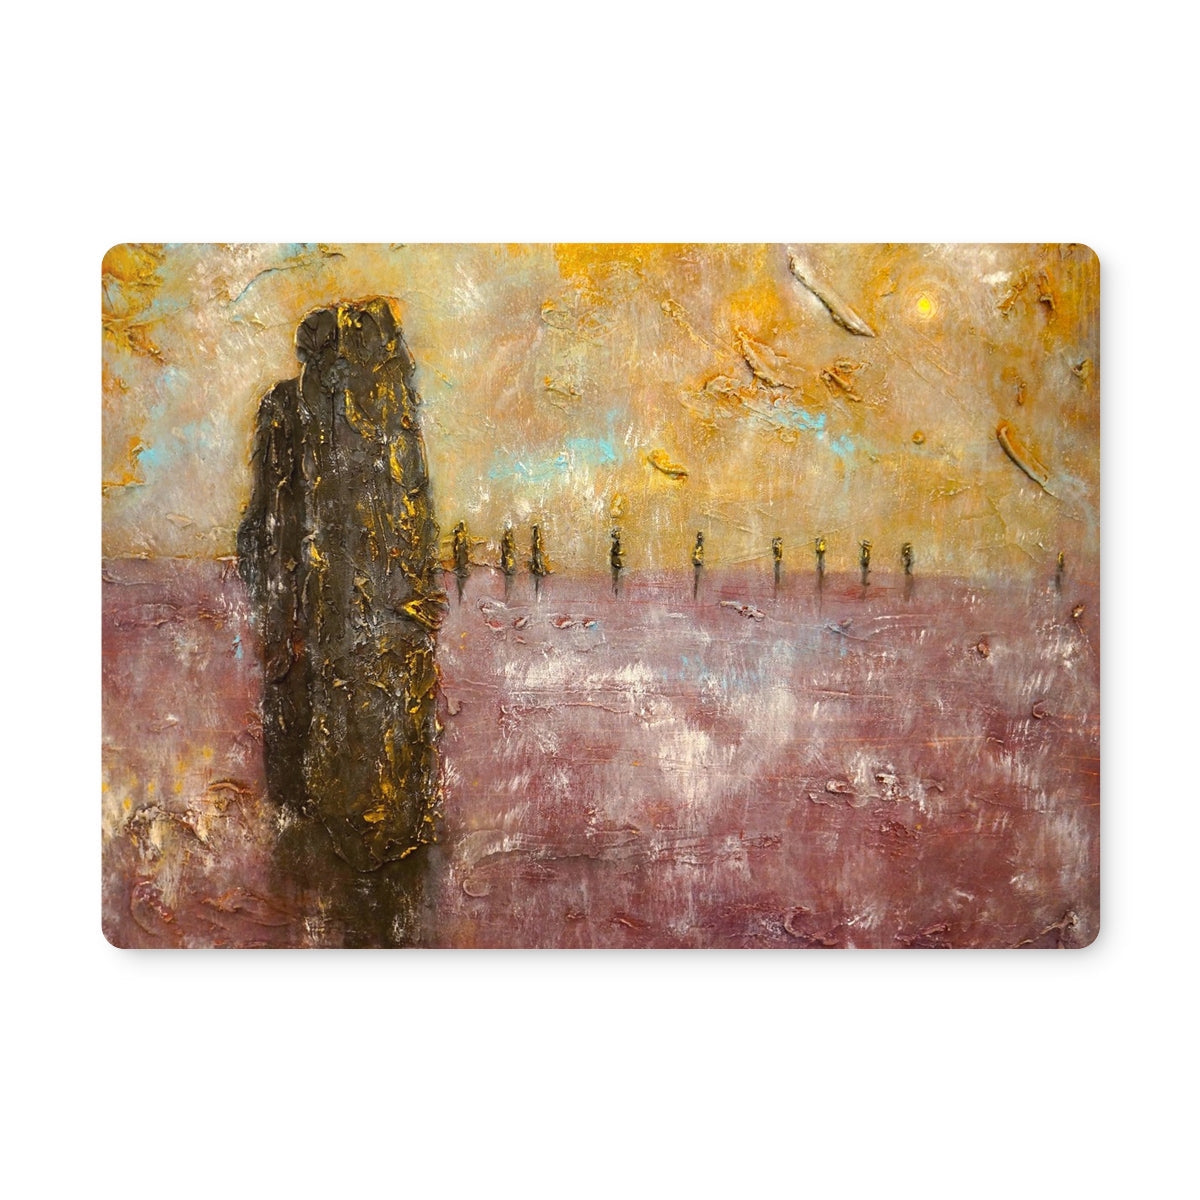 Brodgar Mist Orkney Art Gifts Placemat-Placemats-Orkney Art Gallery-Single Placemat-Paintings, Prints, Homeware, Art Gifts From Scotland By Scottish Artist Kevin Hunter